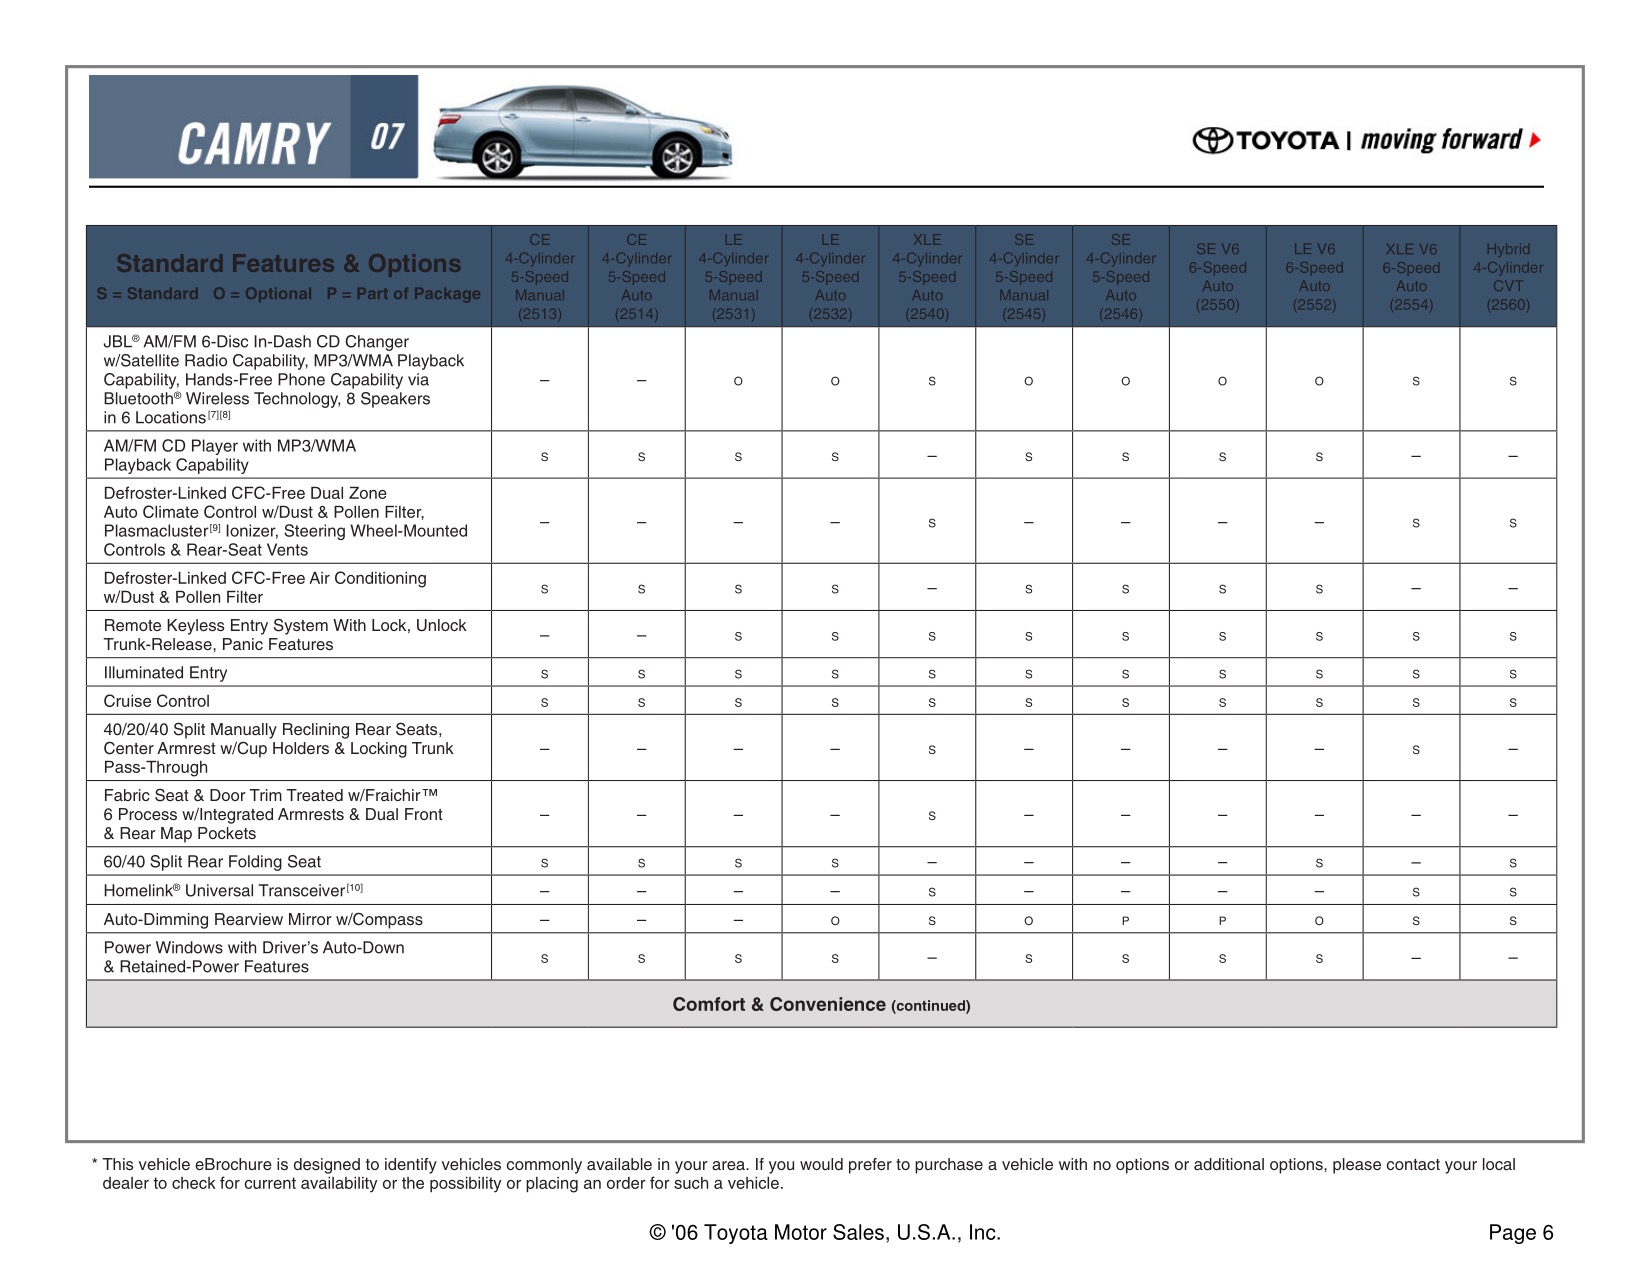 2007 Toyota Camry Brochure Page 16